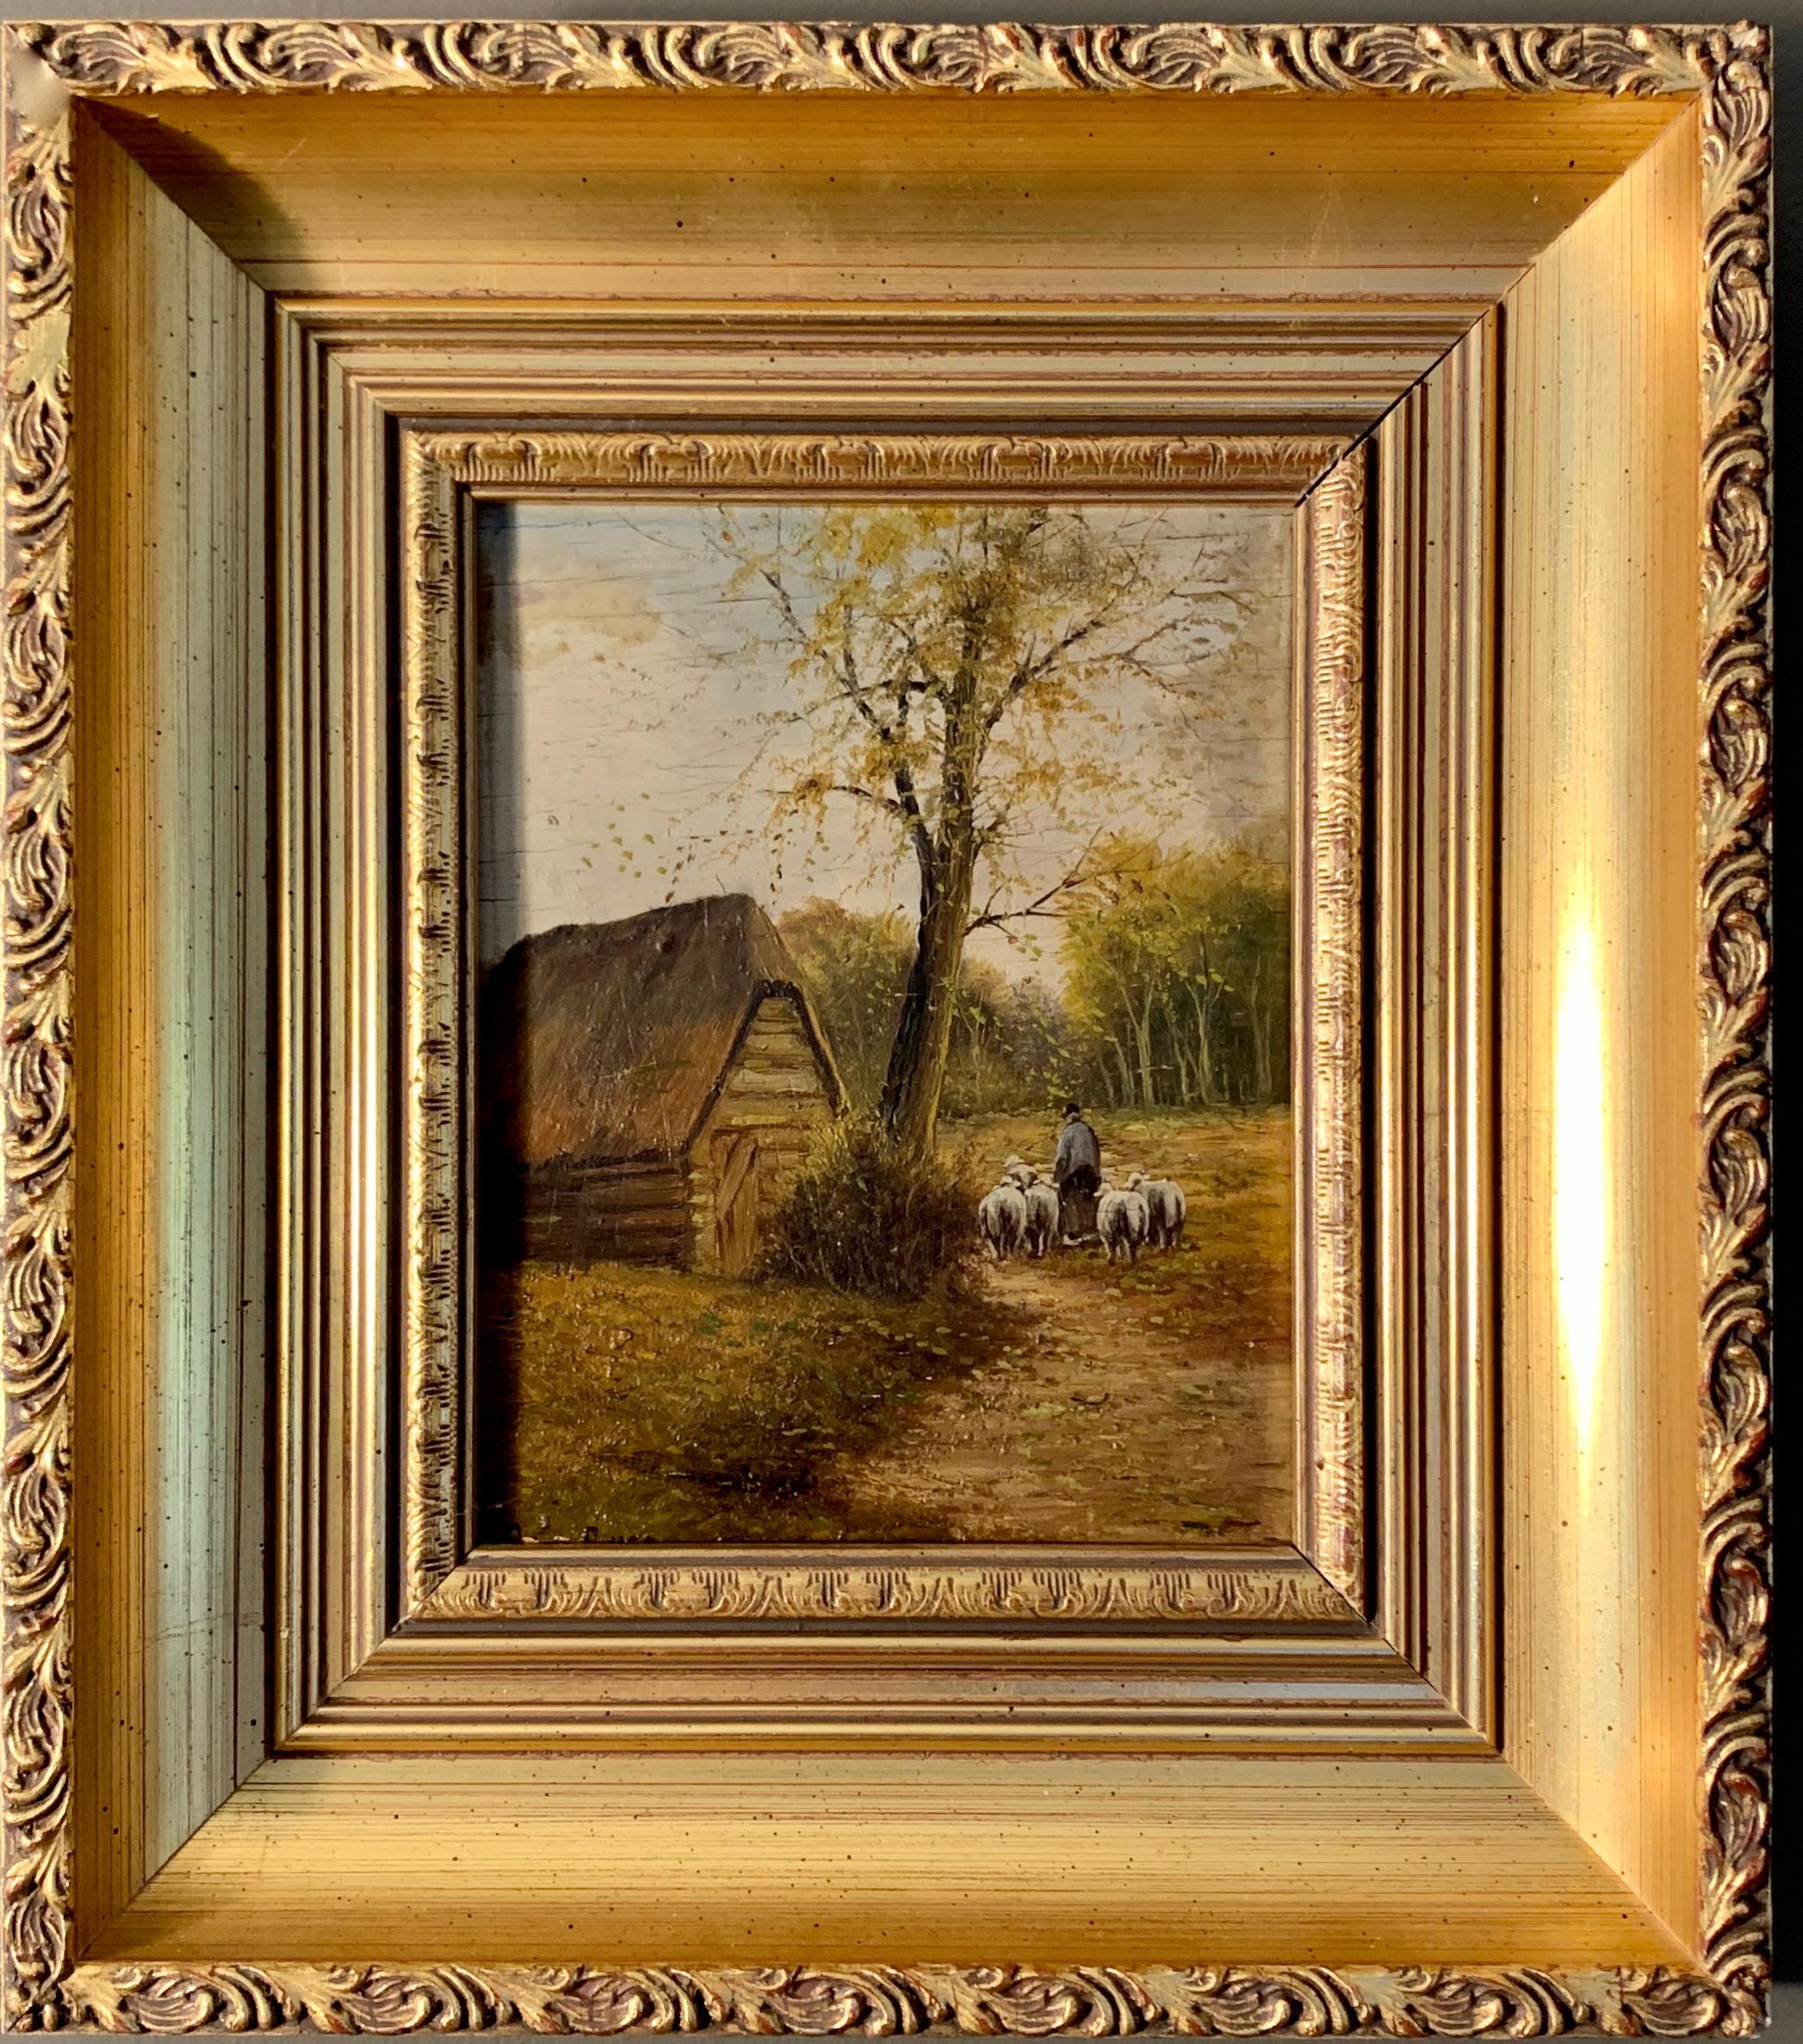 Unknown Landscape Painting - Ecole de Barbizon - Petite French Framed Oil Painting Shepherd and his flock